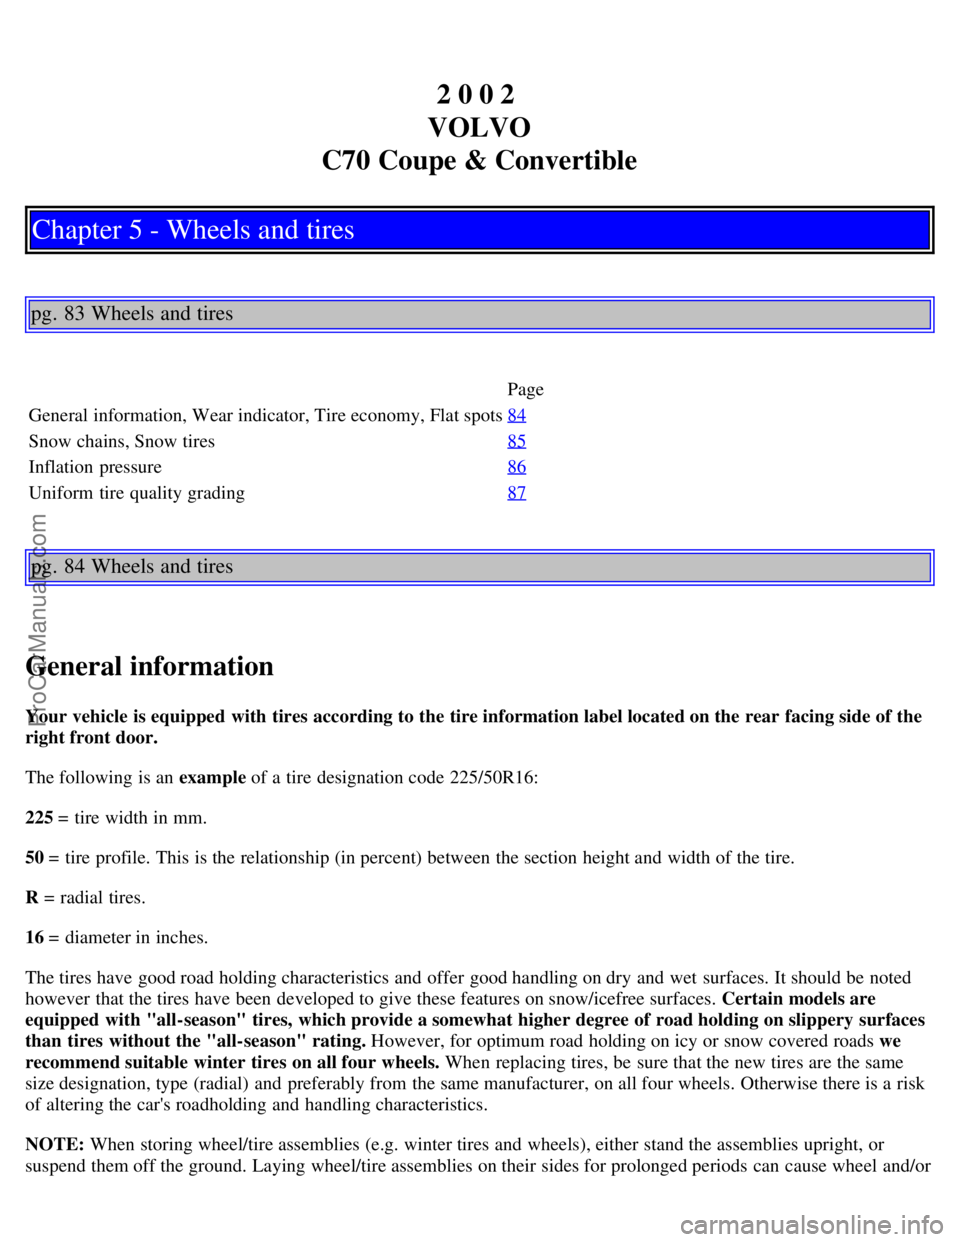 VOLVO C70 2002  Owners Manual 2 0 0 2 
VOLVO
C70 Coupe & Convertible
Chapter 5 - Wheels and tires
pg. 83 Wheels and tires
Page
General information, Wear indicator, Tire economy, Flat spots 84
Snow chains, Snow tires85
Inflation  p